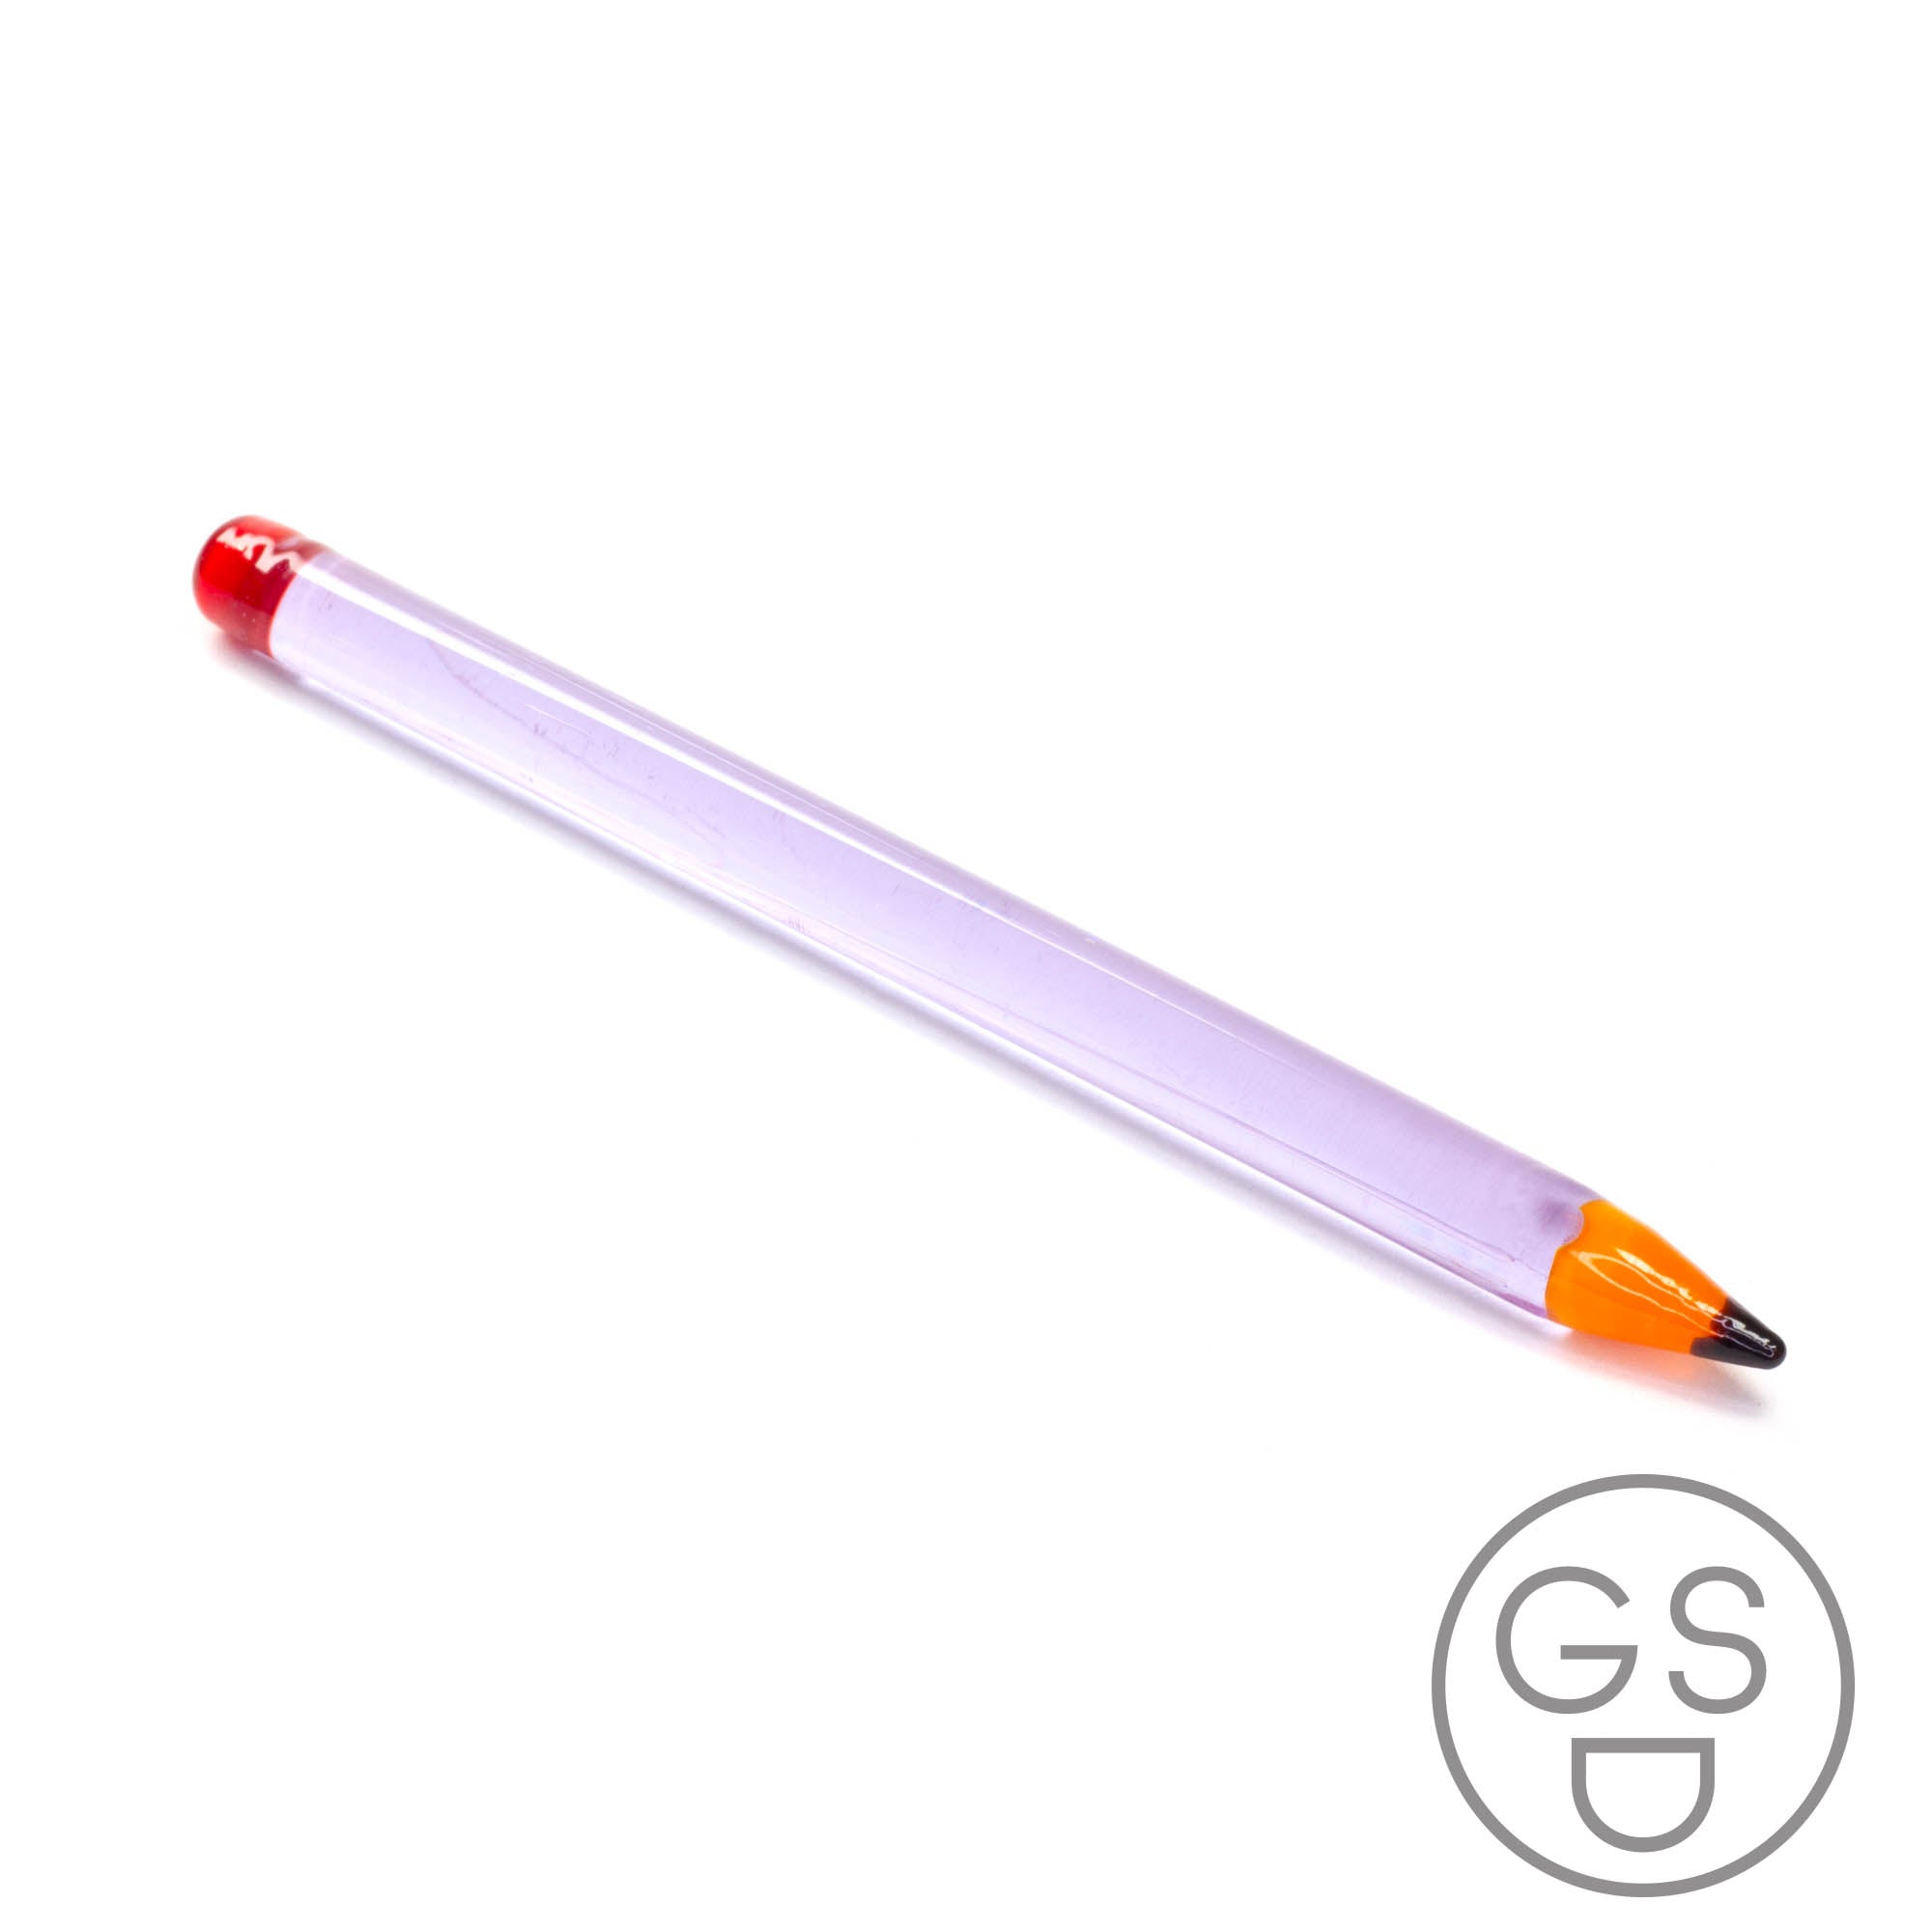 Glass Pencil Concentrate Tool